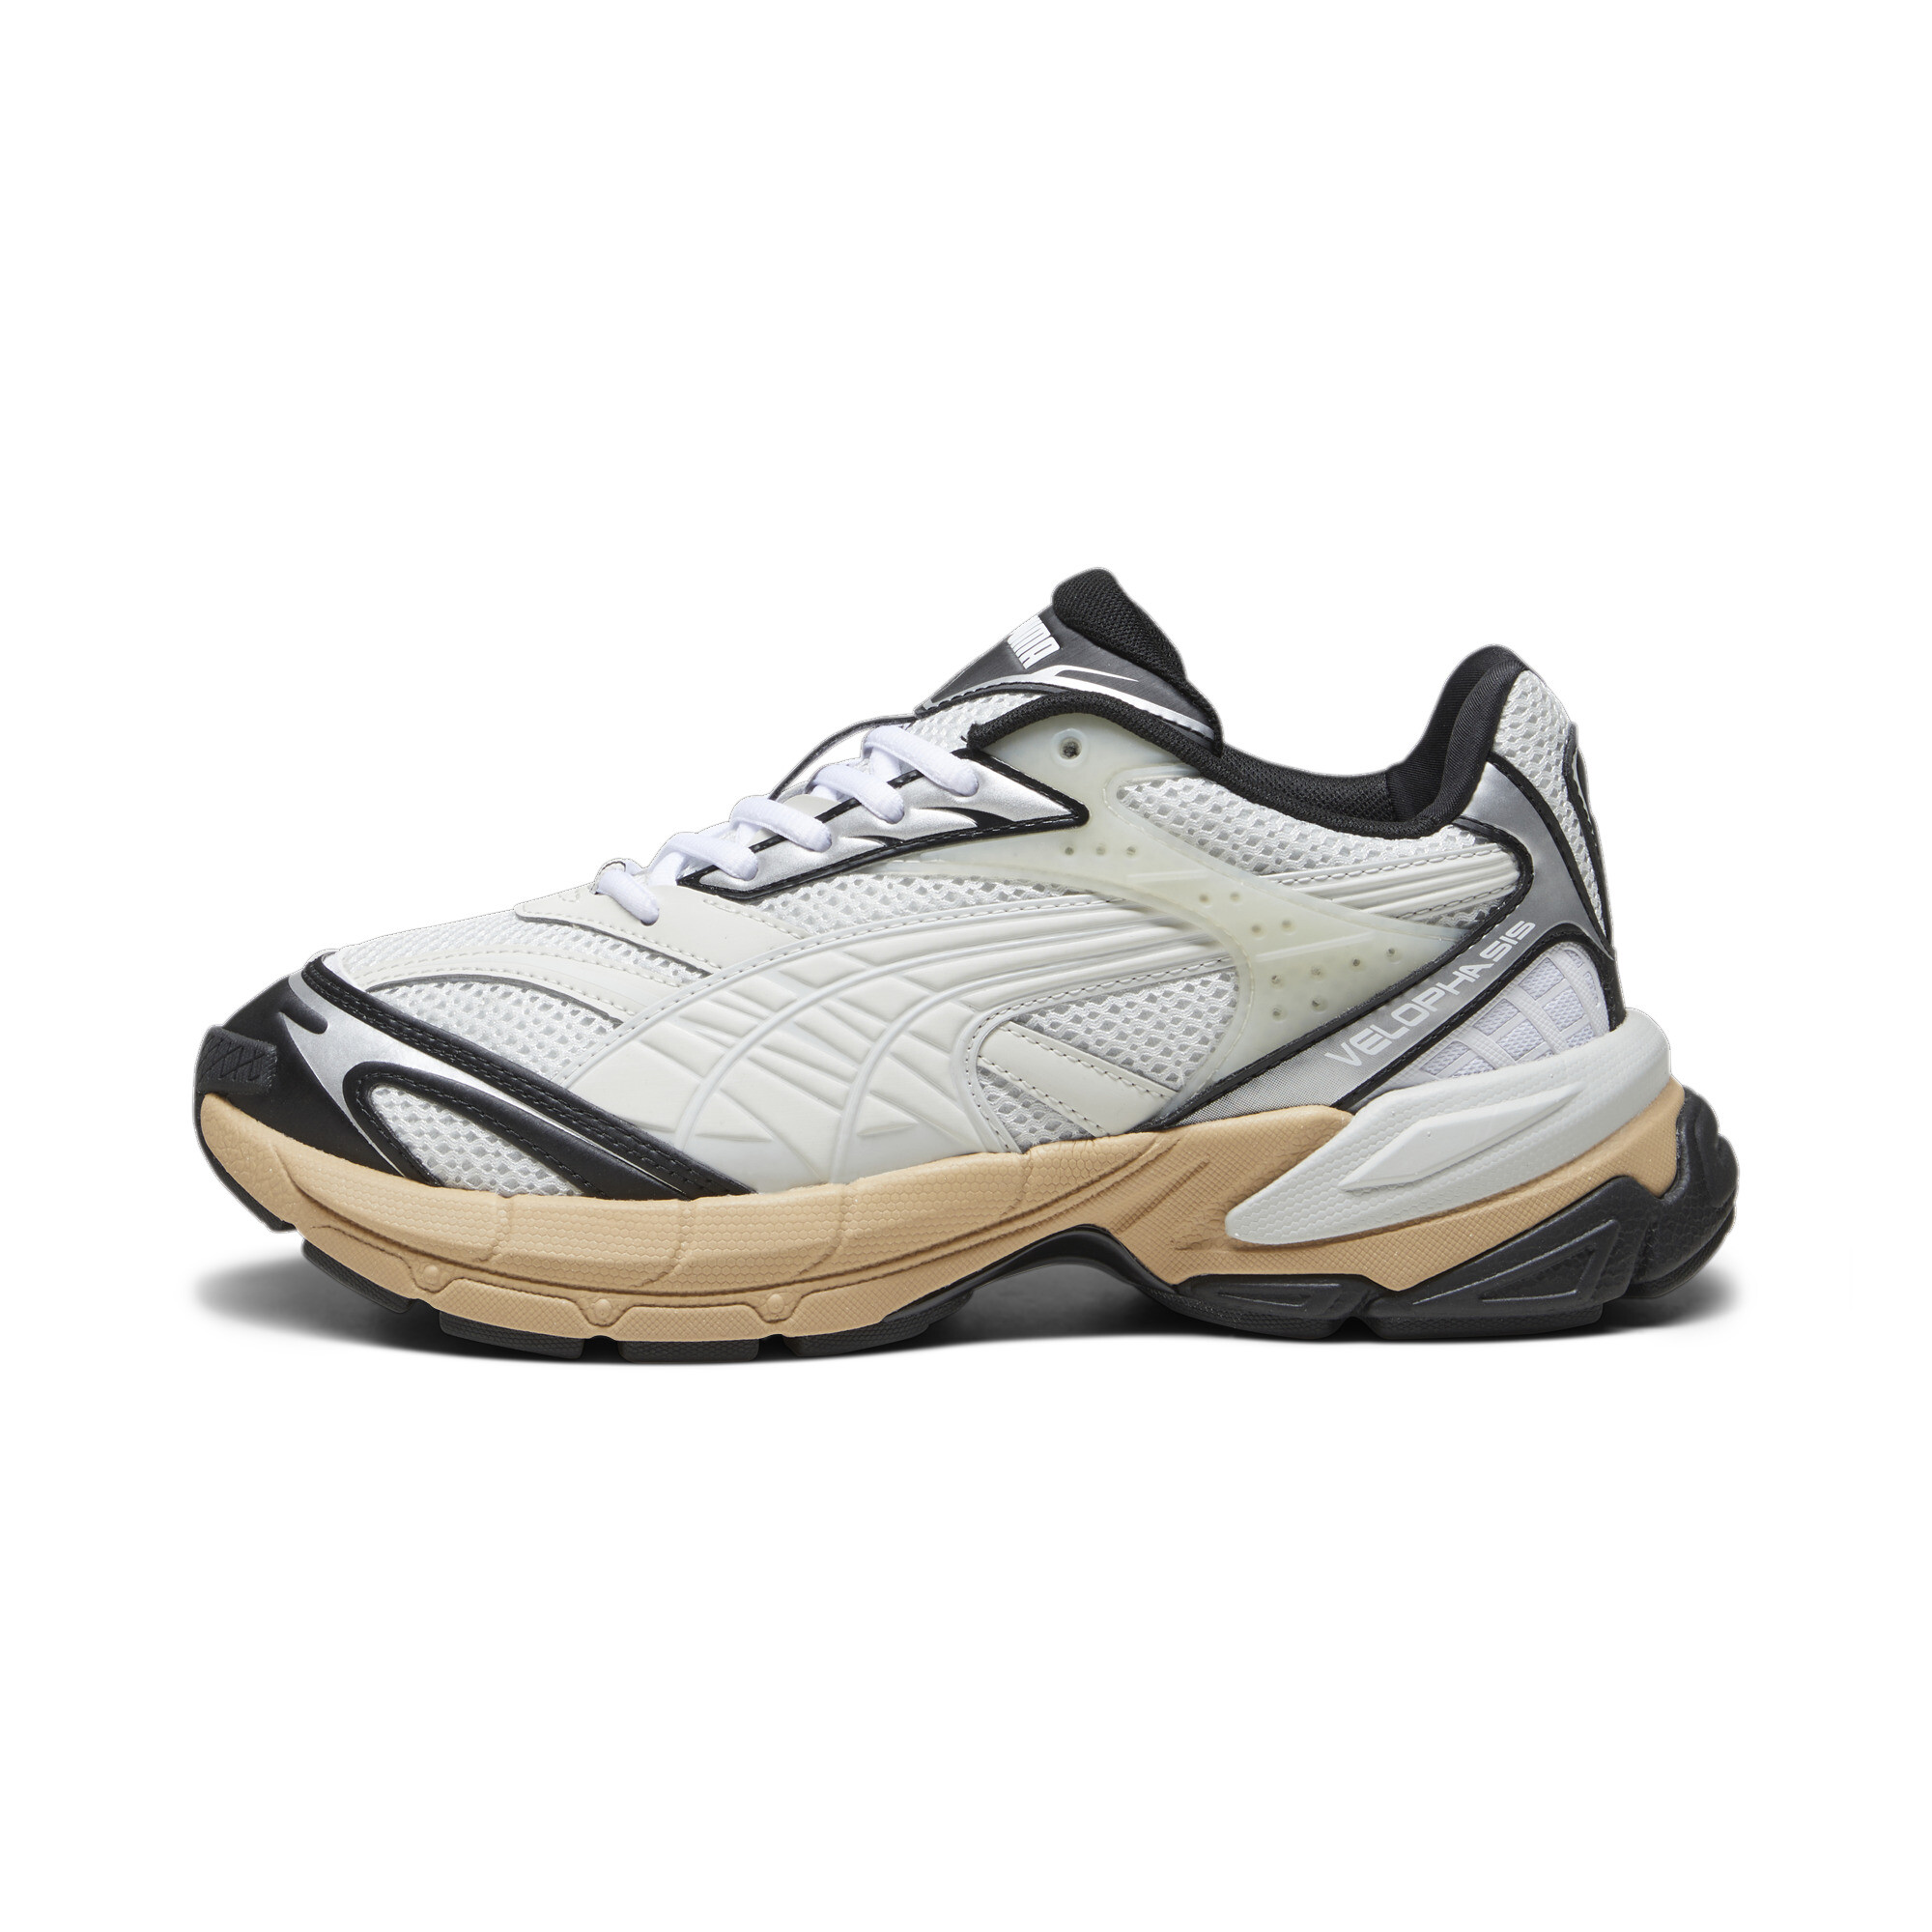 Puma Velophasis Technisch Sneakers, Gray, Size 37.5, Shoes